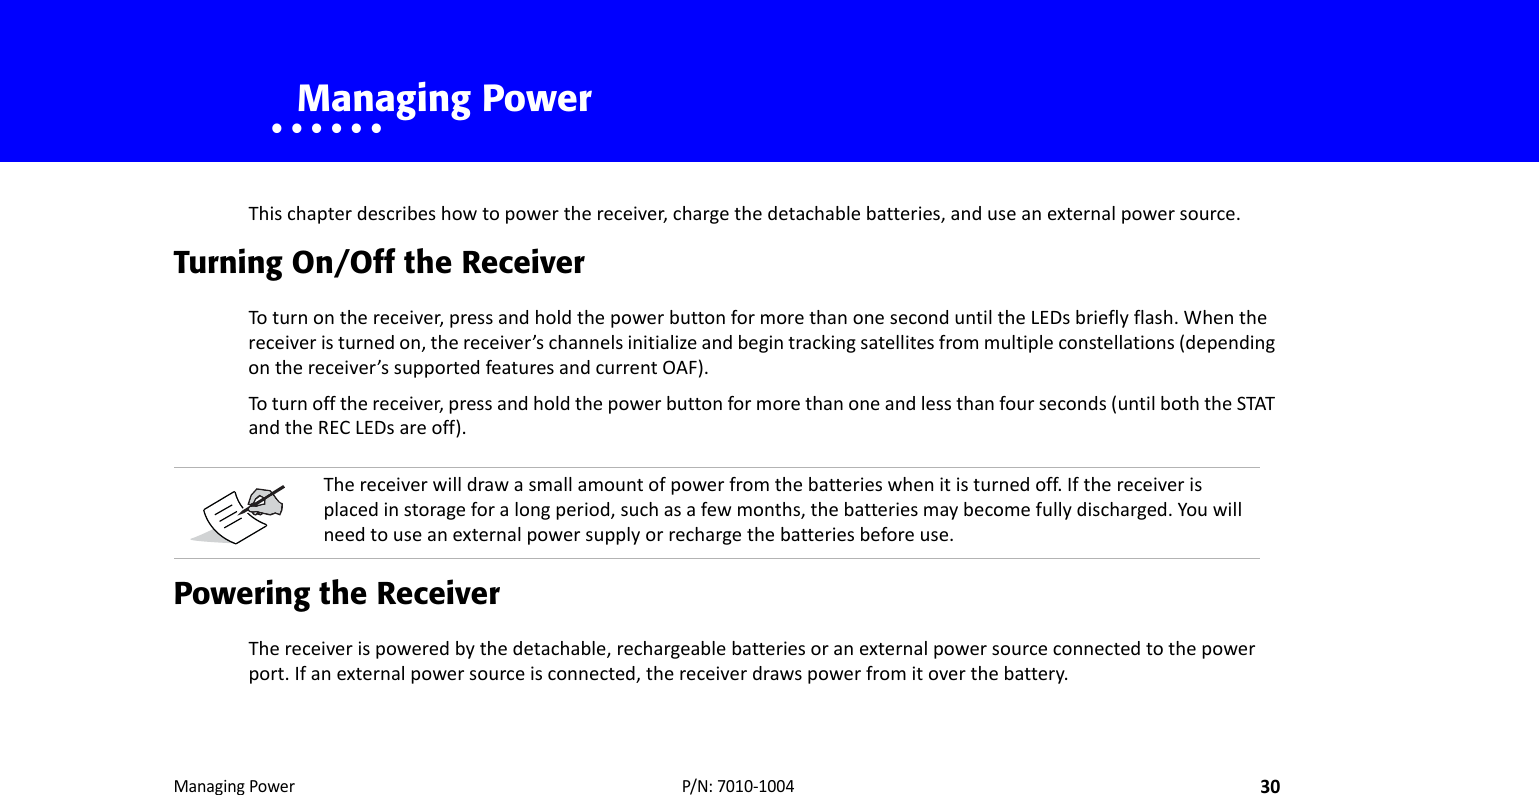 ManagingPower30P/N:7010‐1004• • • • • •    Managing PowerThischapterdescribeshowtopowerthereceiver,chargethedetachablebatteries,anduseanexternalpowersource.Turning On/Off the ReceiverToturnonthereceiver,pressandholdthepowerbuttonformorethanoneseconduntiltheLEDsbrieflyflash.Whenthereceiveristurnedon,thereceiver’schannelsinitializeandbegintrackingsatellitesfrommultipleconstellations(dependingonthereceiver’ssupportedfeaturesandcurrentOAF).Toturnoffthereceiver,pressandholdthepowerbuttonformorethanoneandlessthanfourseconds(untilboththeSTATandtheRECLEDsareoff).Powering the ReceiverThereceiverispoweredbythedetachable,rechargeablebatteriesoranexternalpowersourceconnectedtothepowerport.Ifanexternalpowersourceisconnected,thereceiverdrawspowerfromitoverthebattery.Thereceiverwilldrawasmallamountofpowerfromthebatterieswhenitisturnedoff.Ifthereceiverisplacedinstorageforalongperiod,suchasafewmonths,thebatteriesmaybecomefullydischarged.Youwillneedtouseanexternalpowersupplyorrechargethebatteriesbeforeuse.